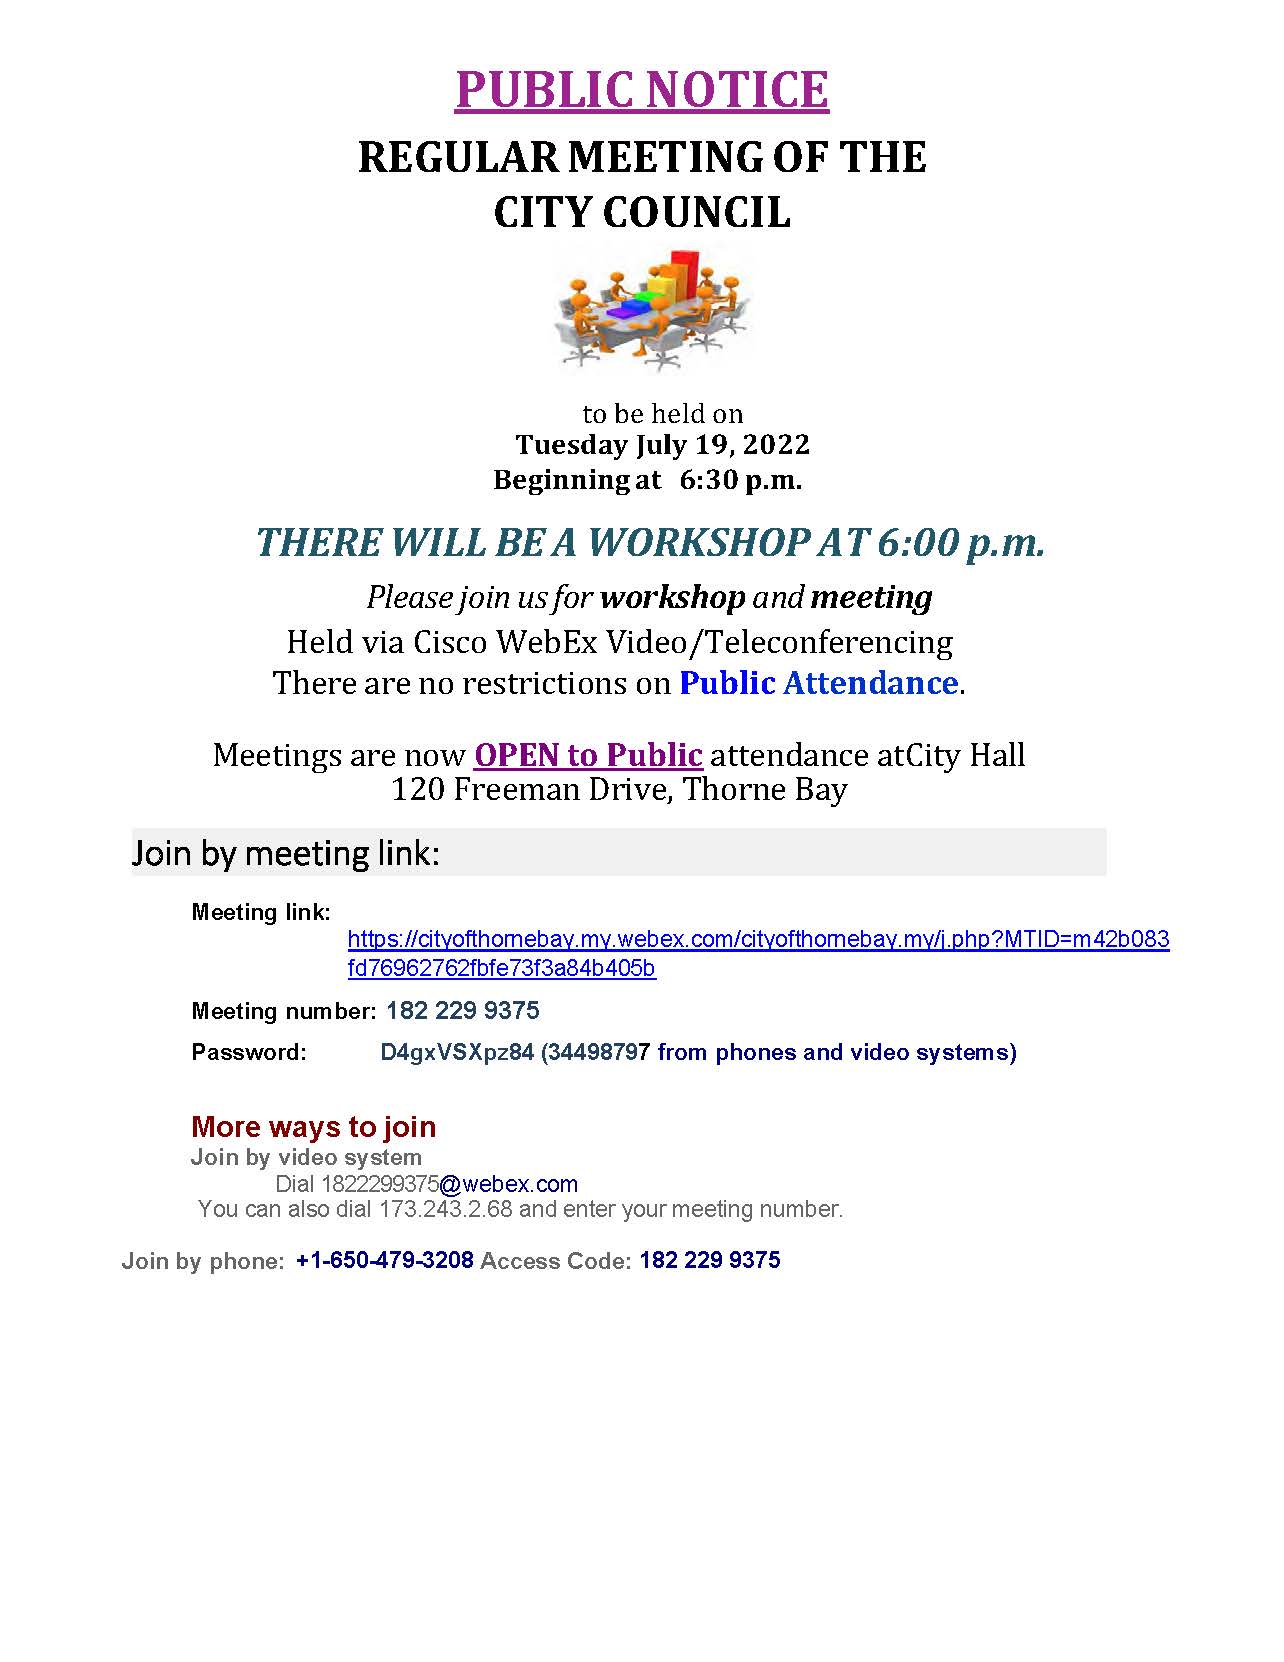 City Council Meeting, July 19th